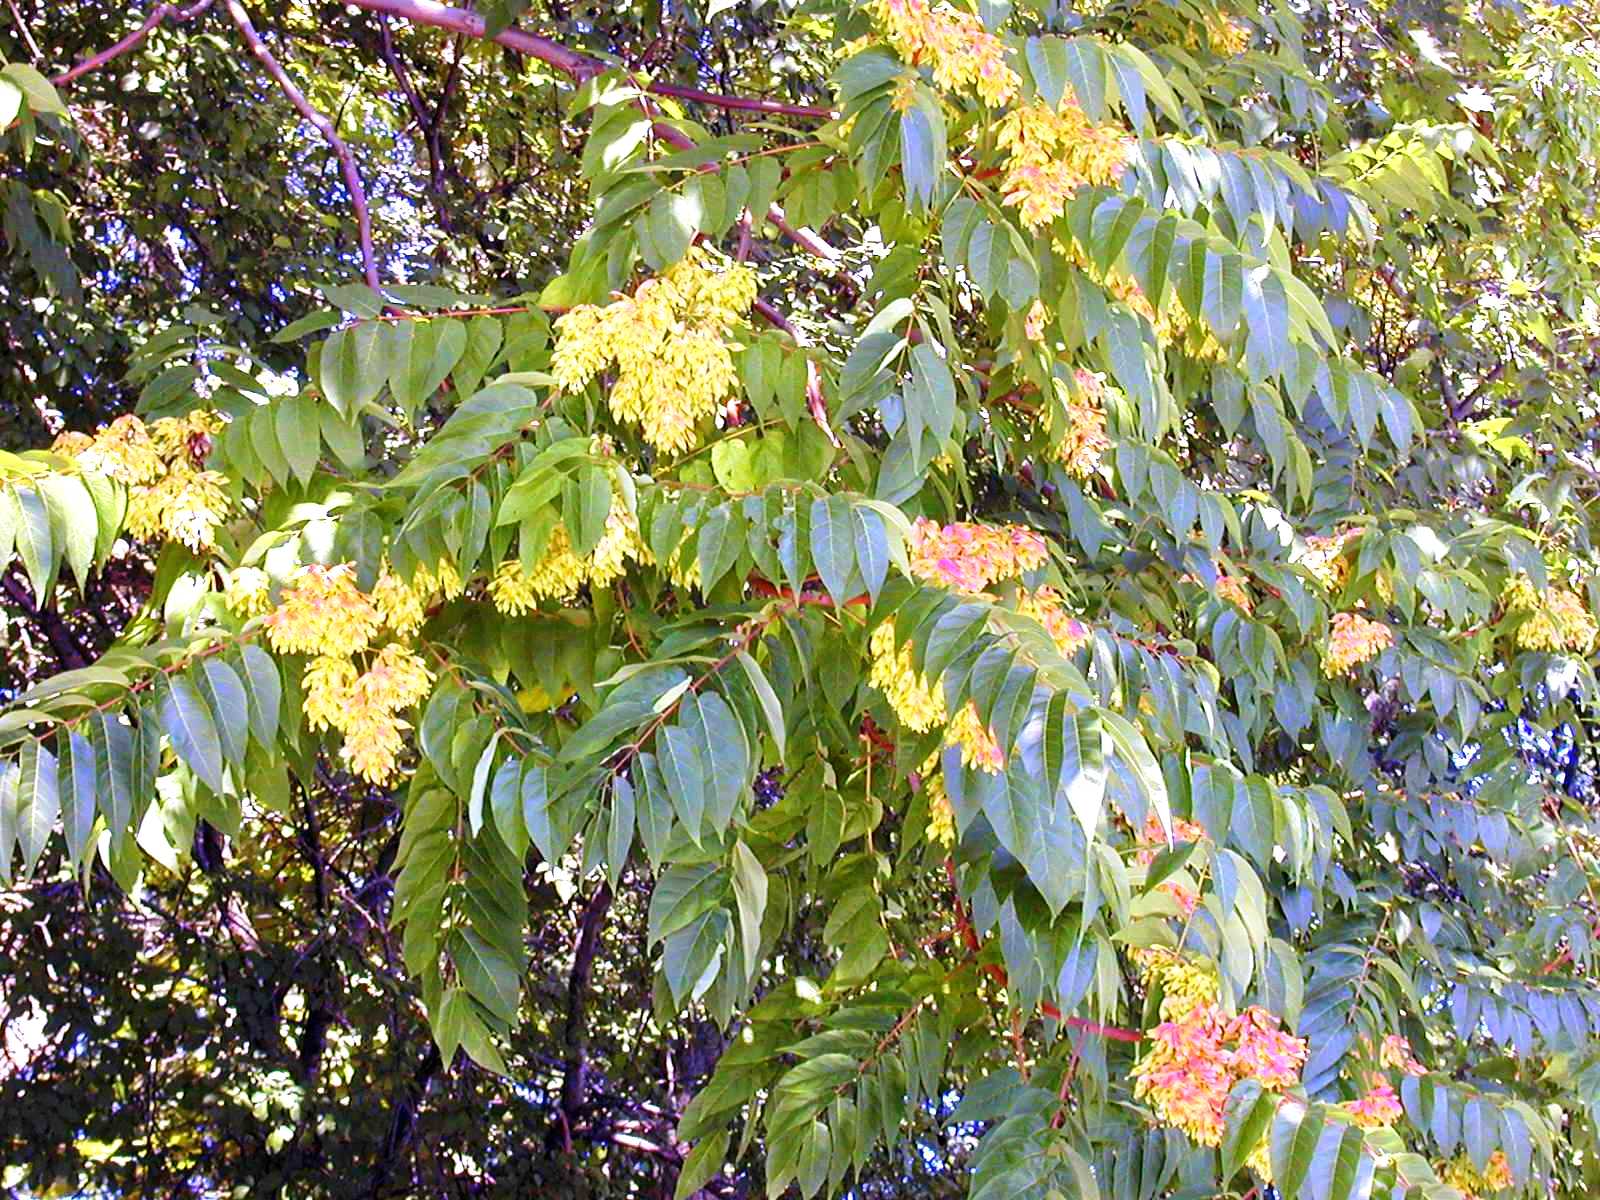 Norway Maple and Ailanthus | Finger Lakes Land Trust